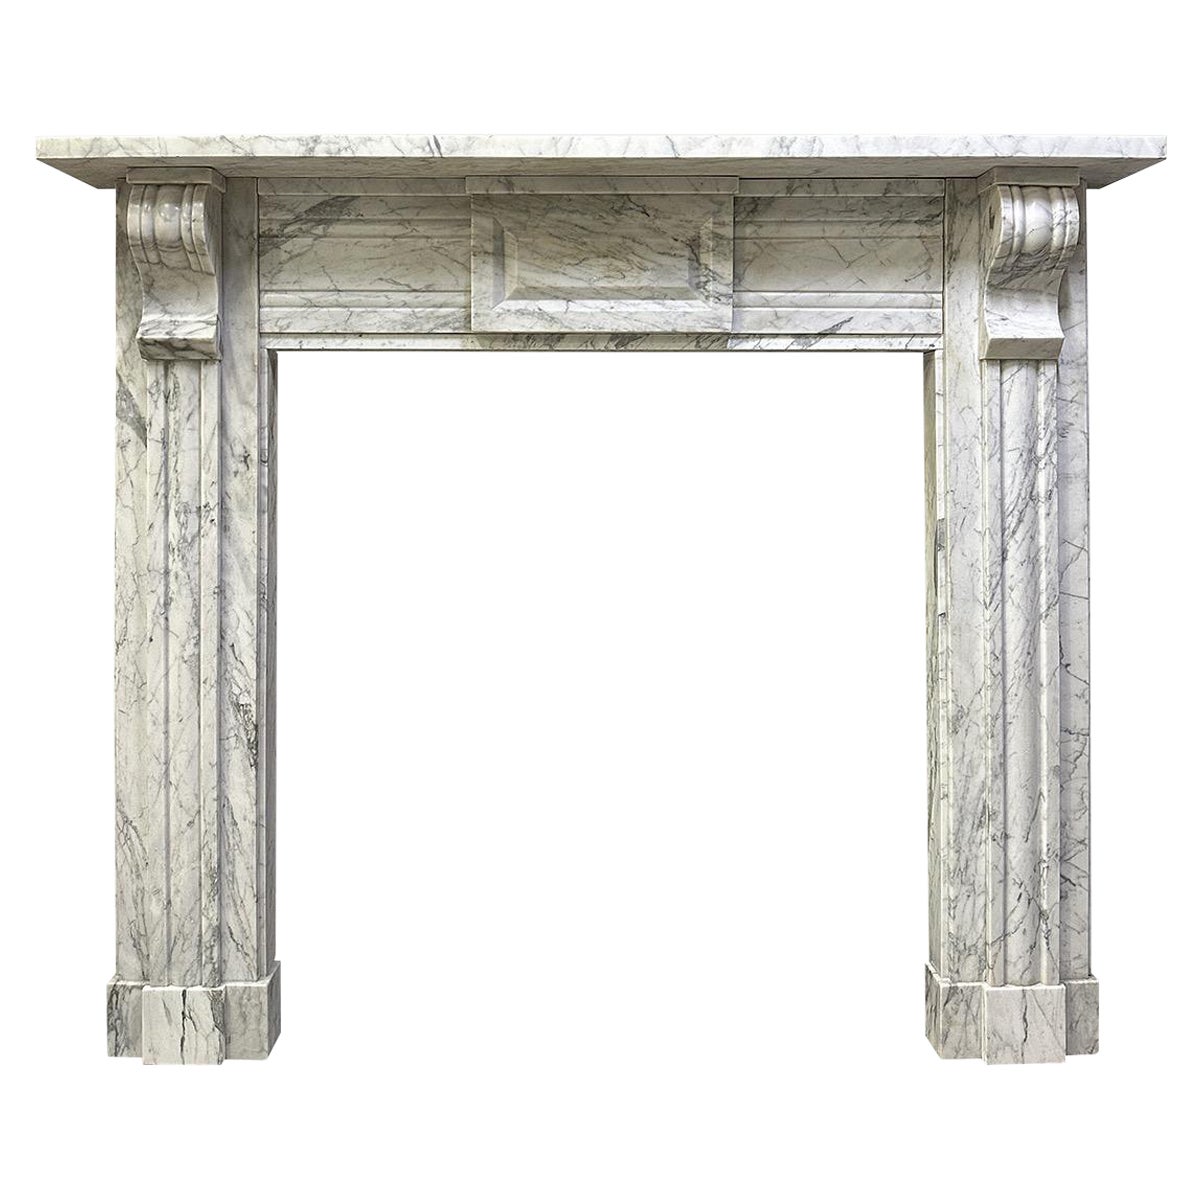 An Irish Antique Regency Period Marble Fireplace Mantel  For Sale